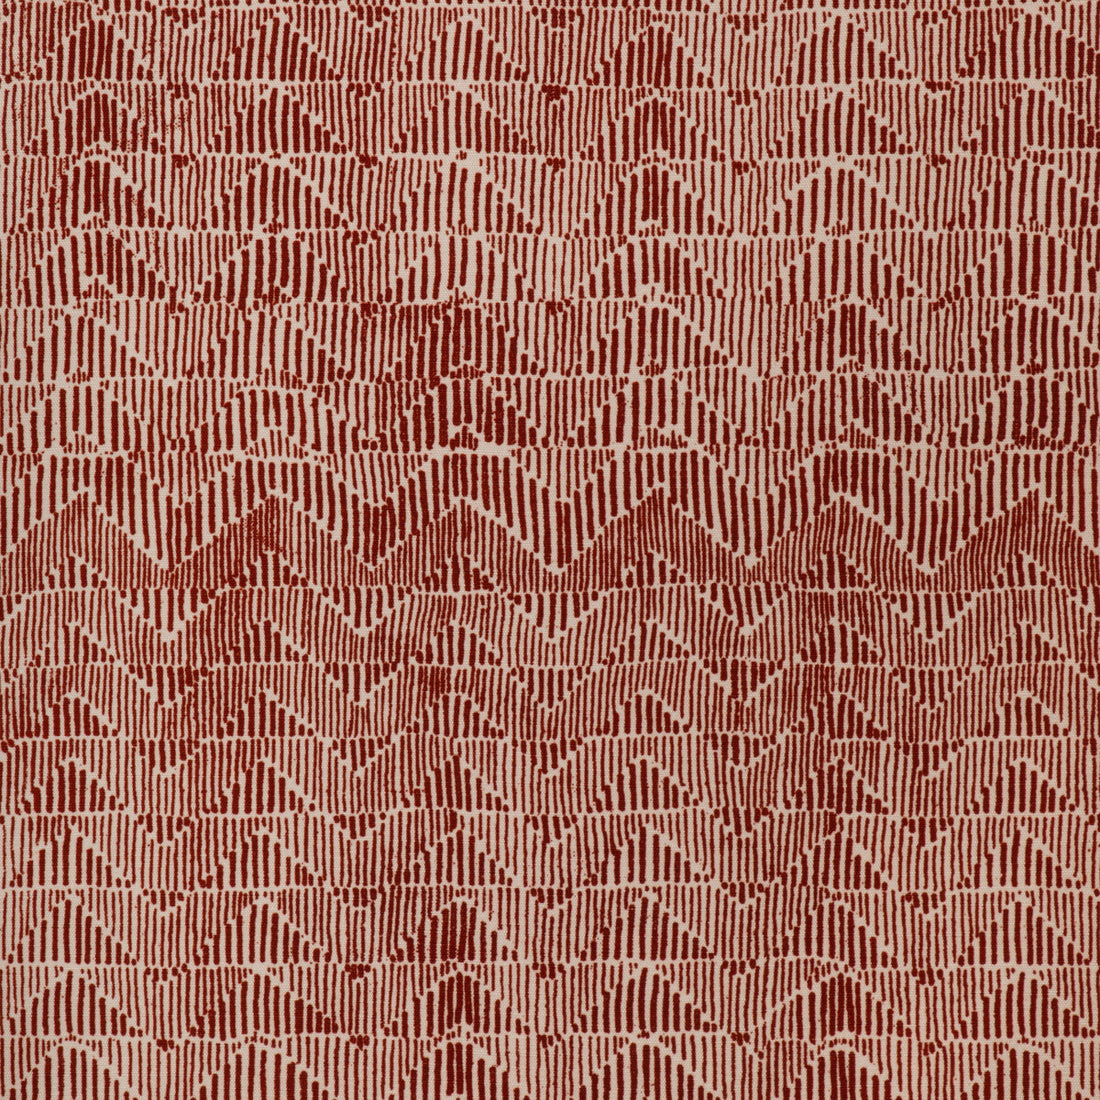 Les Cigales Print fabric in madder color - pattern 8024112.19.0 - by Brunschwig &amp; Fils in the Les Ensembliers L&